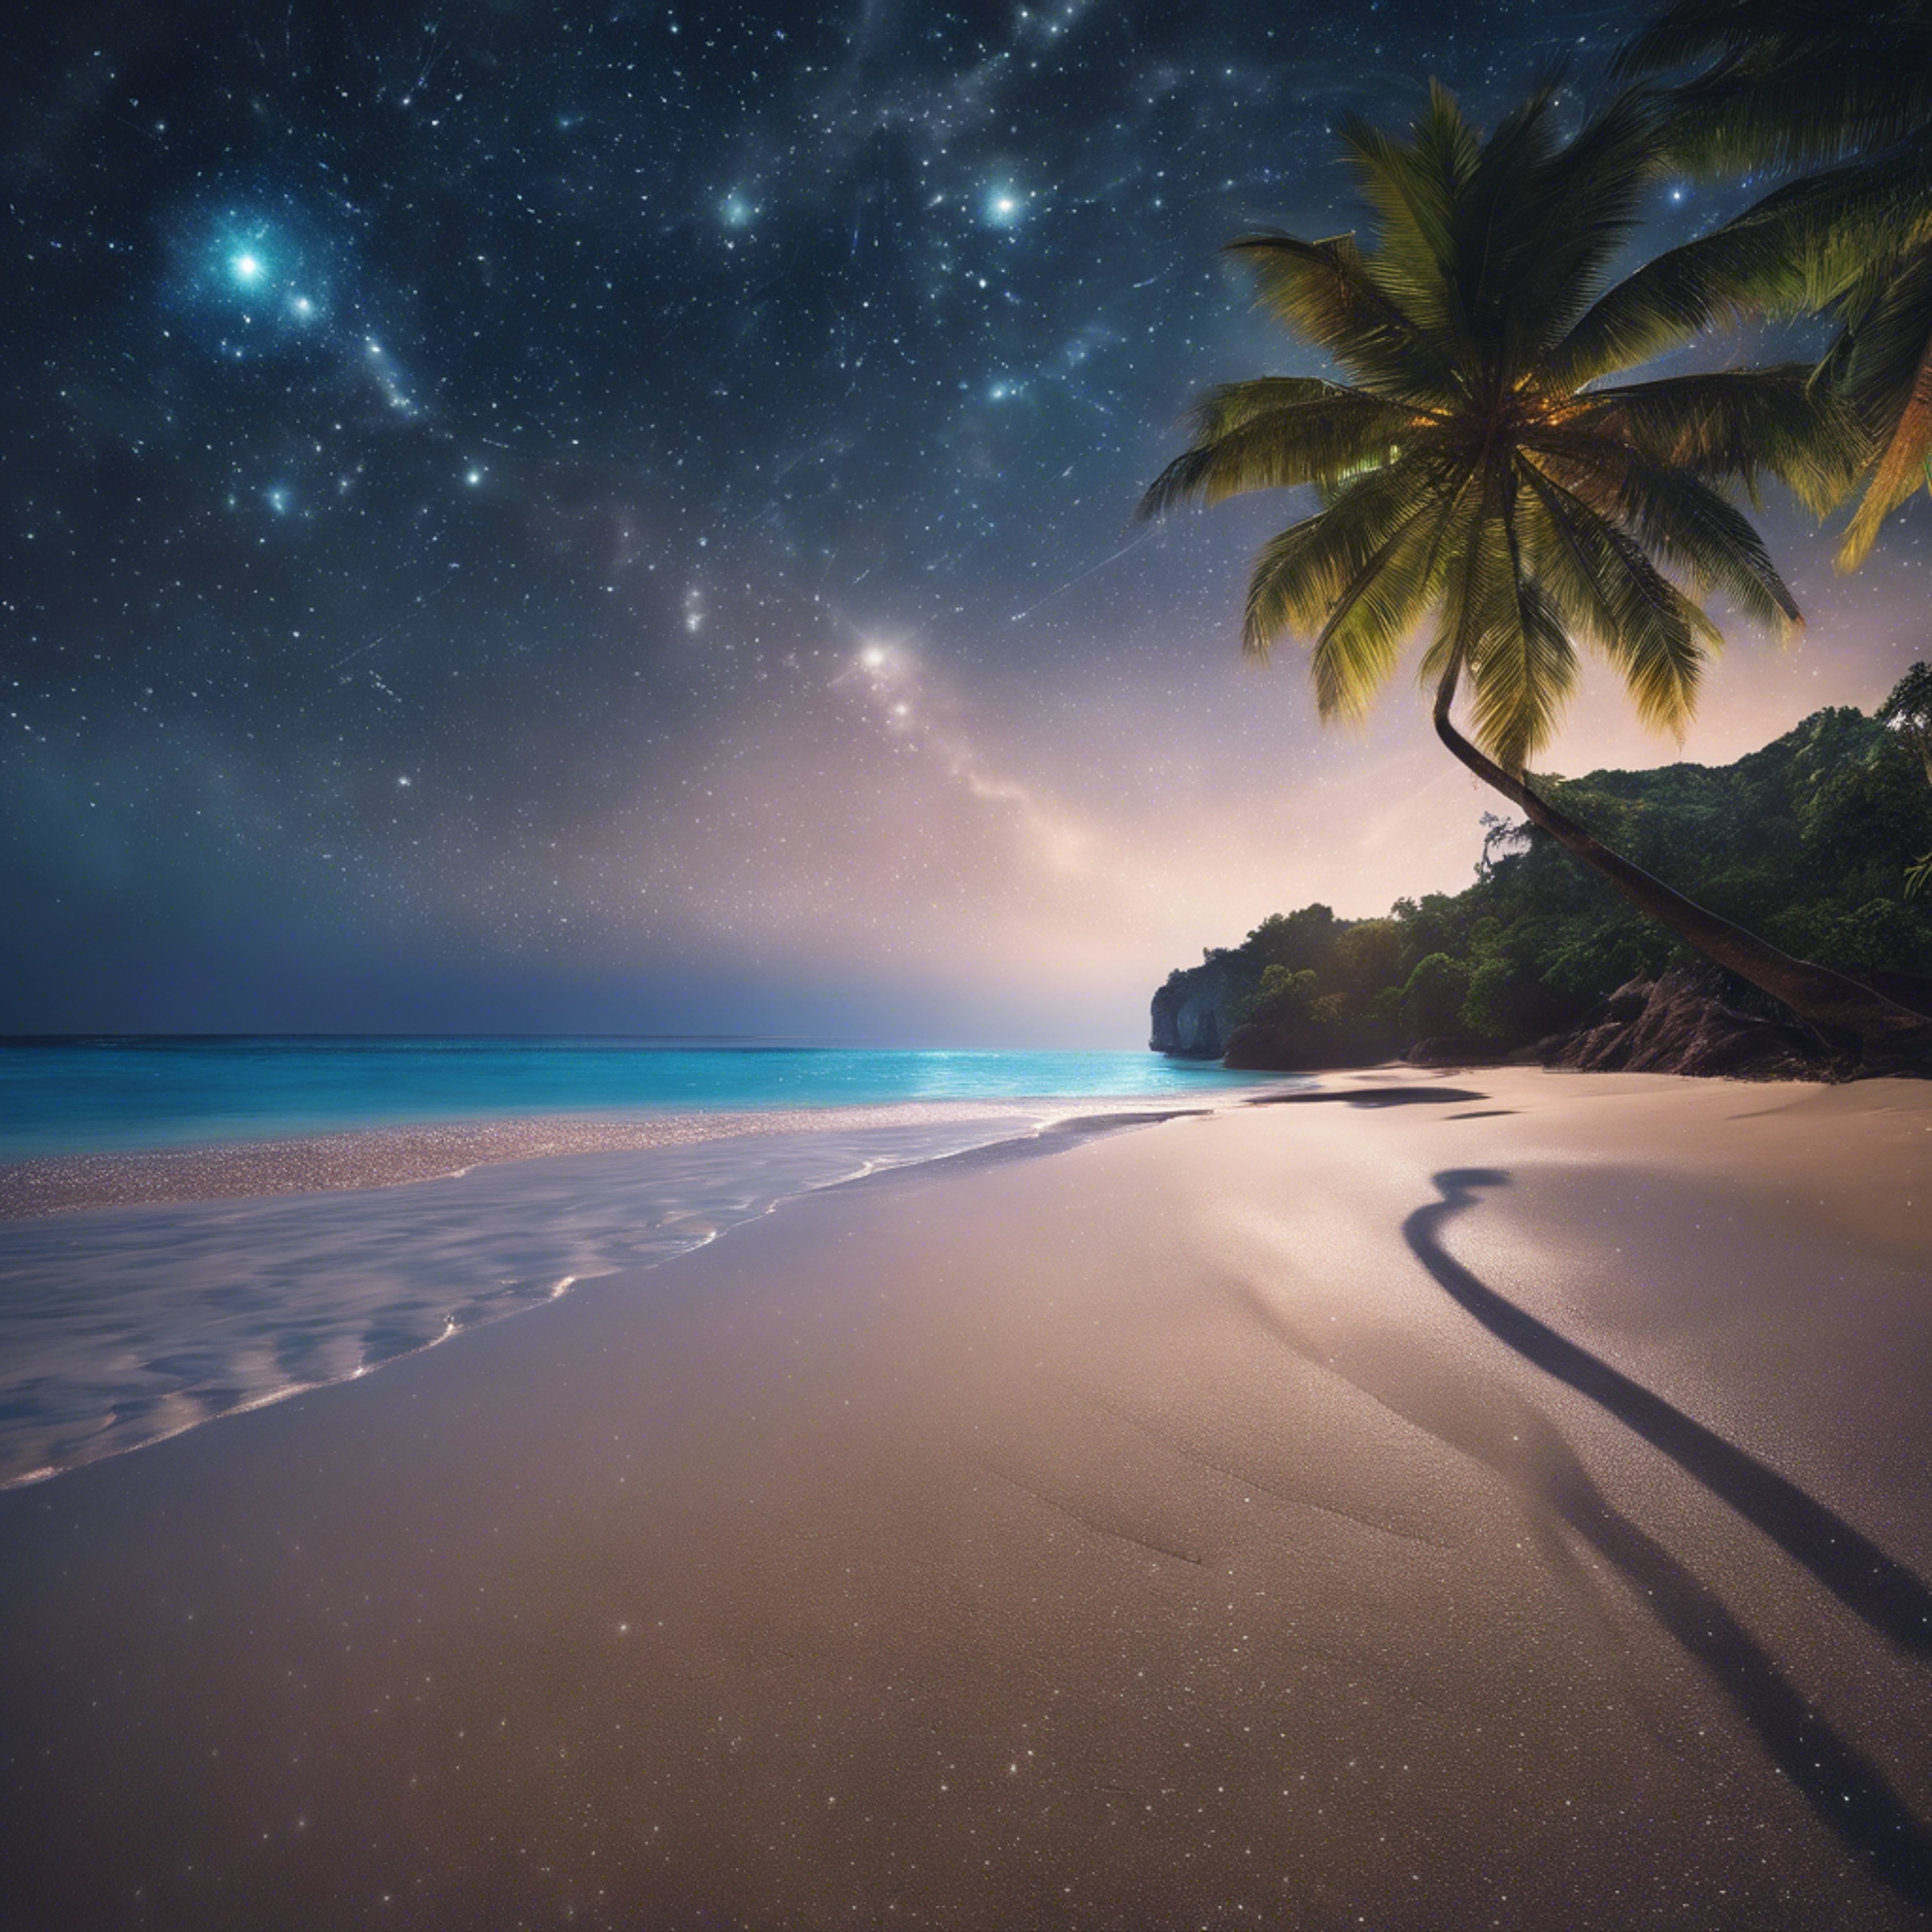 Gleaming stars encrusted in the night sky above a tranquil tropical beach. Tapeta[e4d213f7e6244d2f8918]